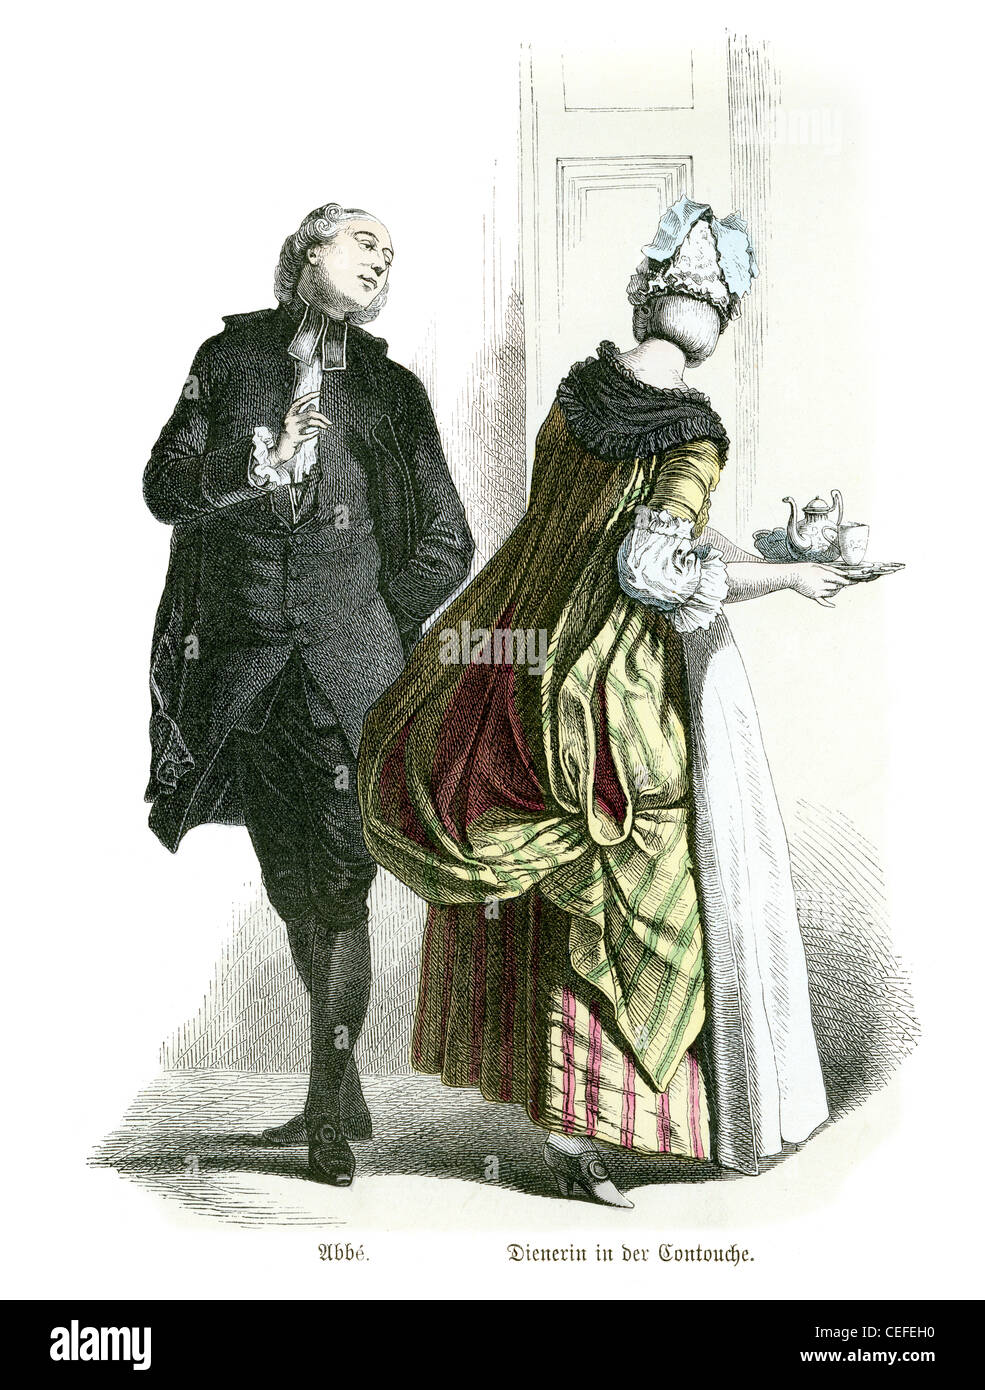 A French Abbe and servant wearing a Contouche (or robe à la française, robe battante,  sack dress), from the 18th century Stock Photo